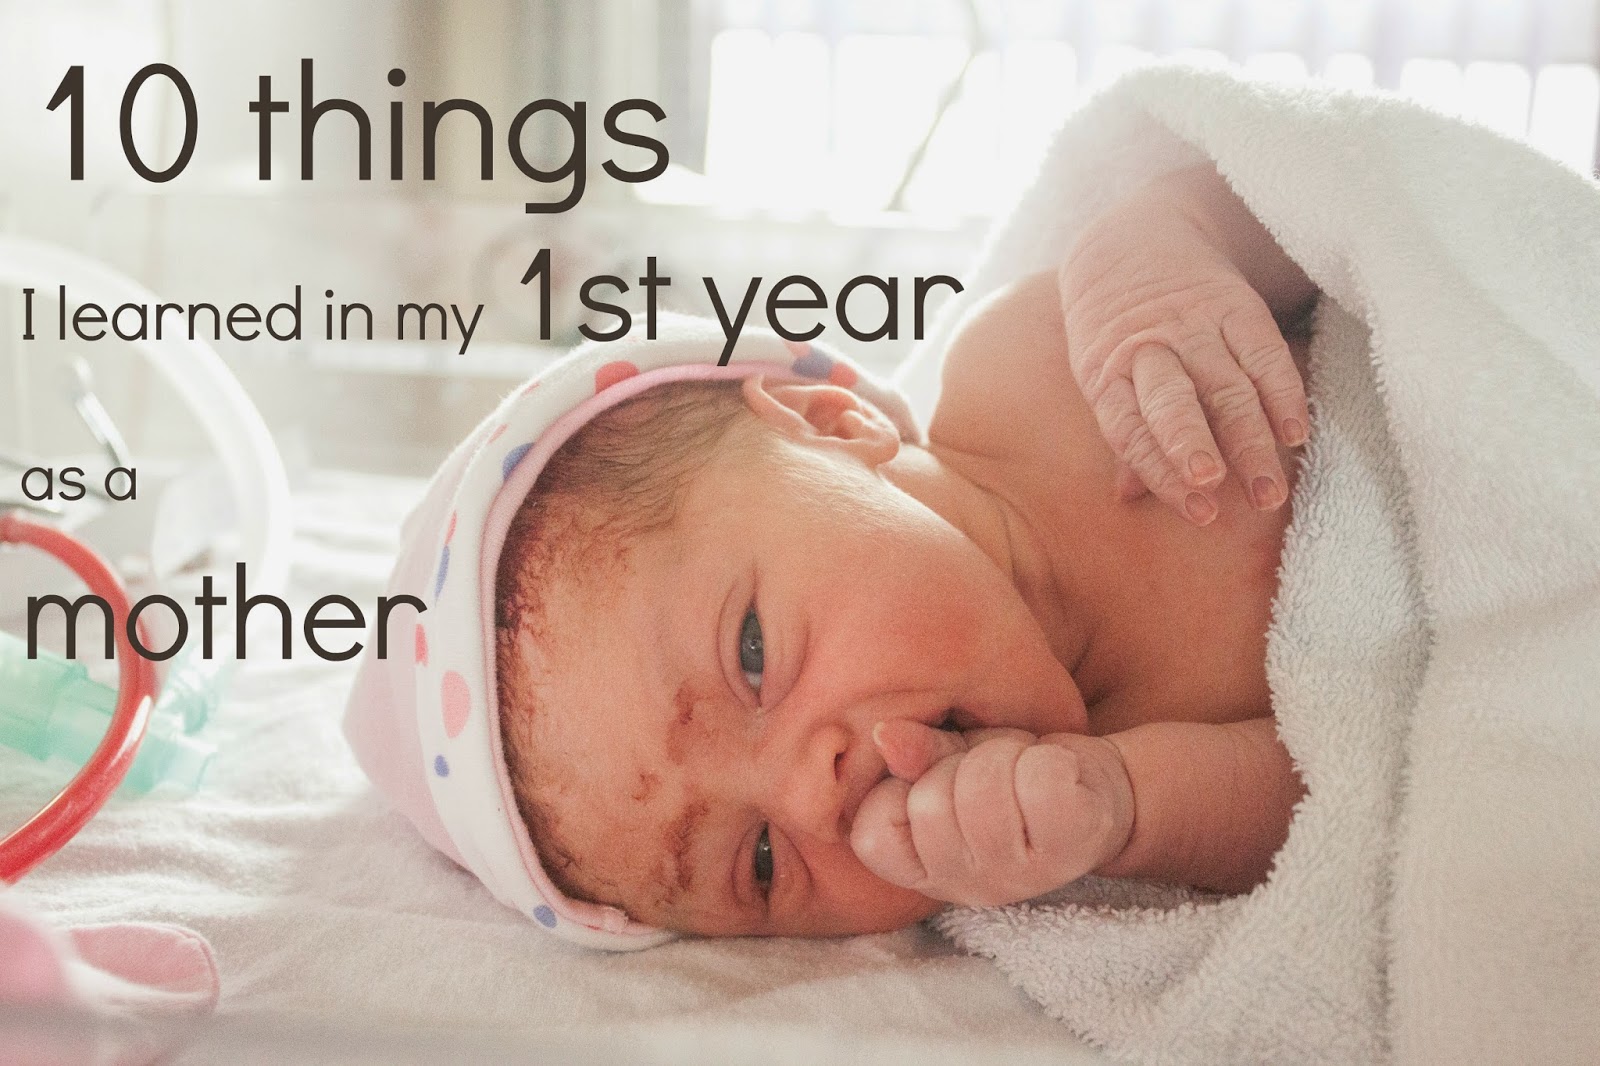 http://www.wavetomummy.com/2014/09/10-things-i-learned-in-my-first-year-as.html